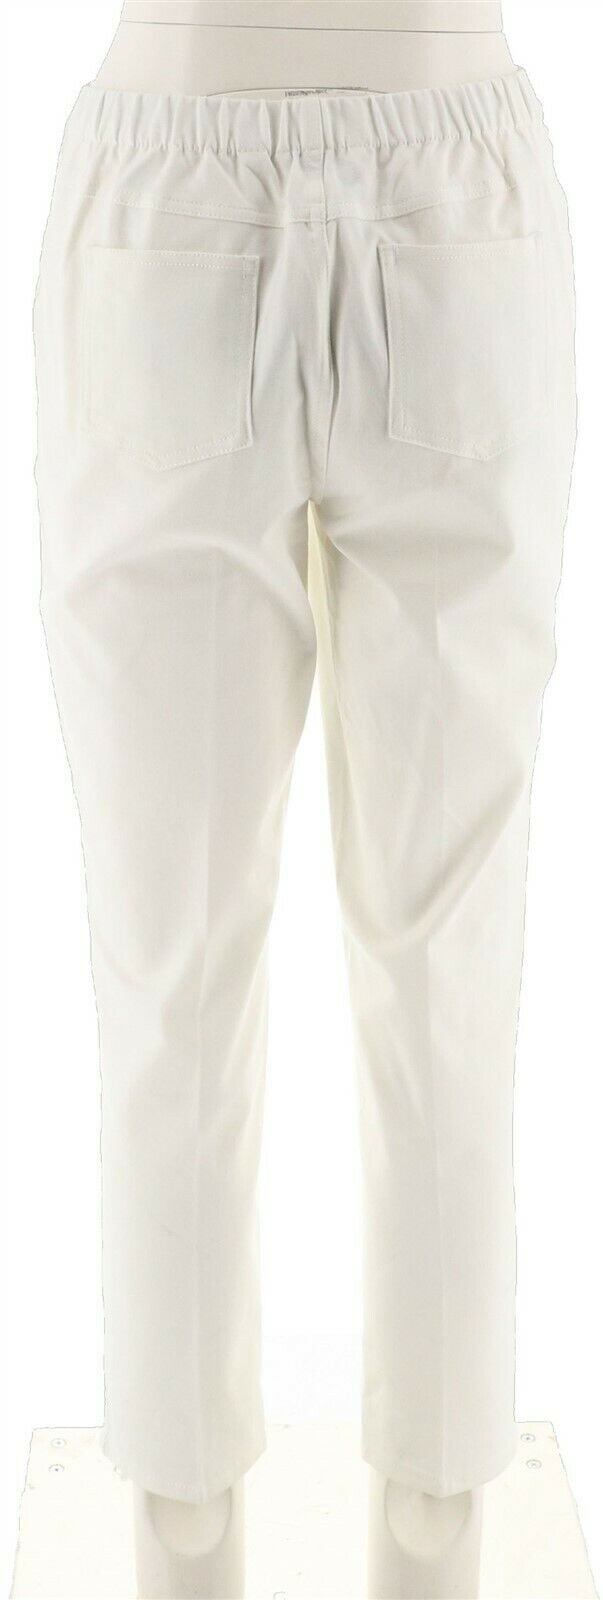 Isaac Mizrahi 24 7 Stretch Pull-On Ankle Pants Cadet Navy 12 NEW A220443